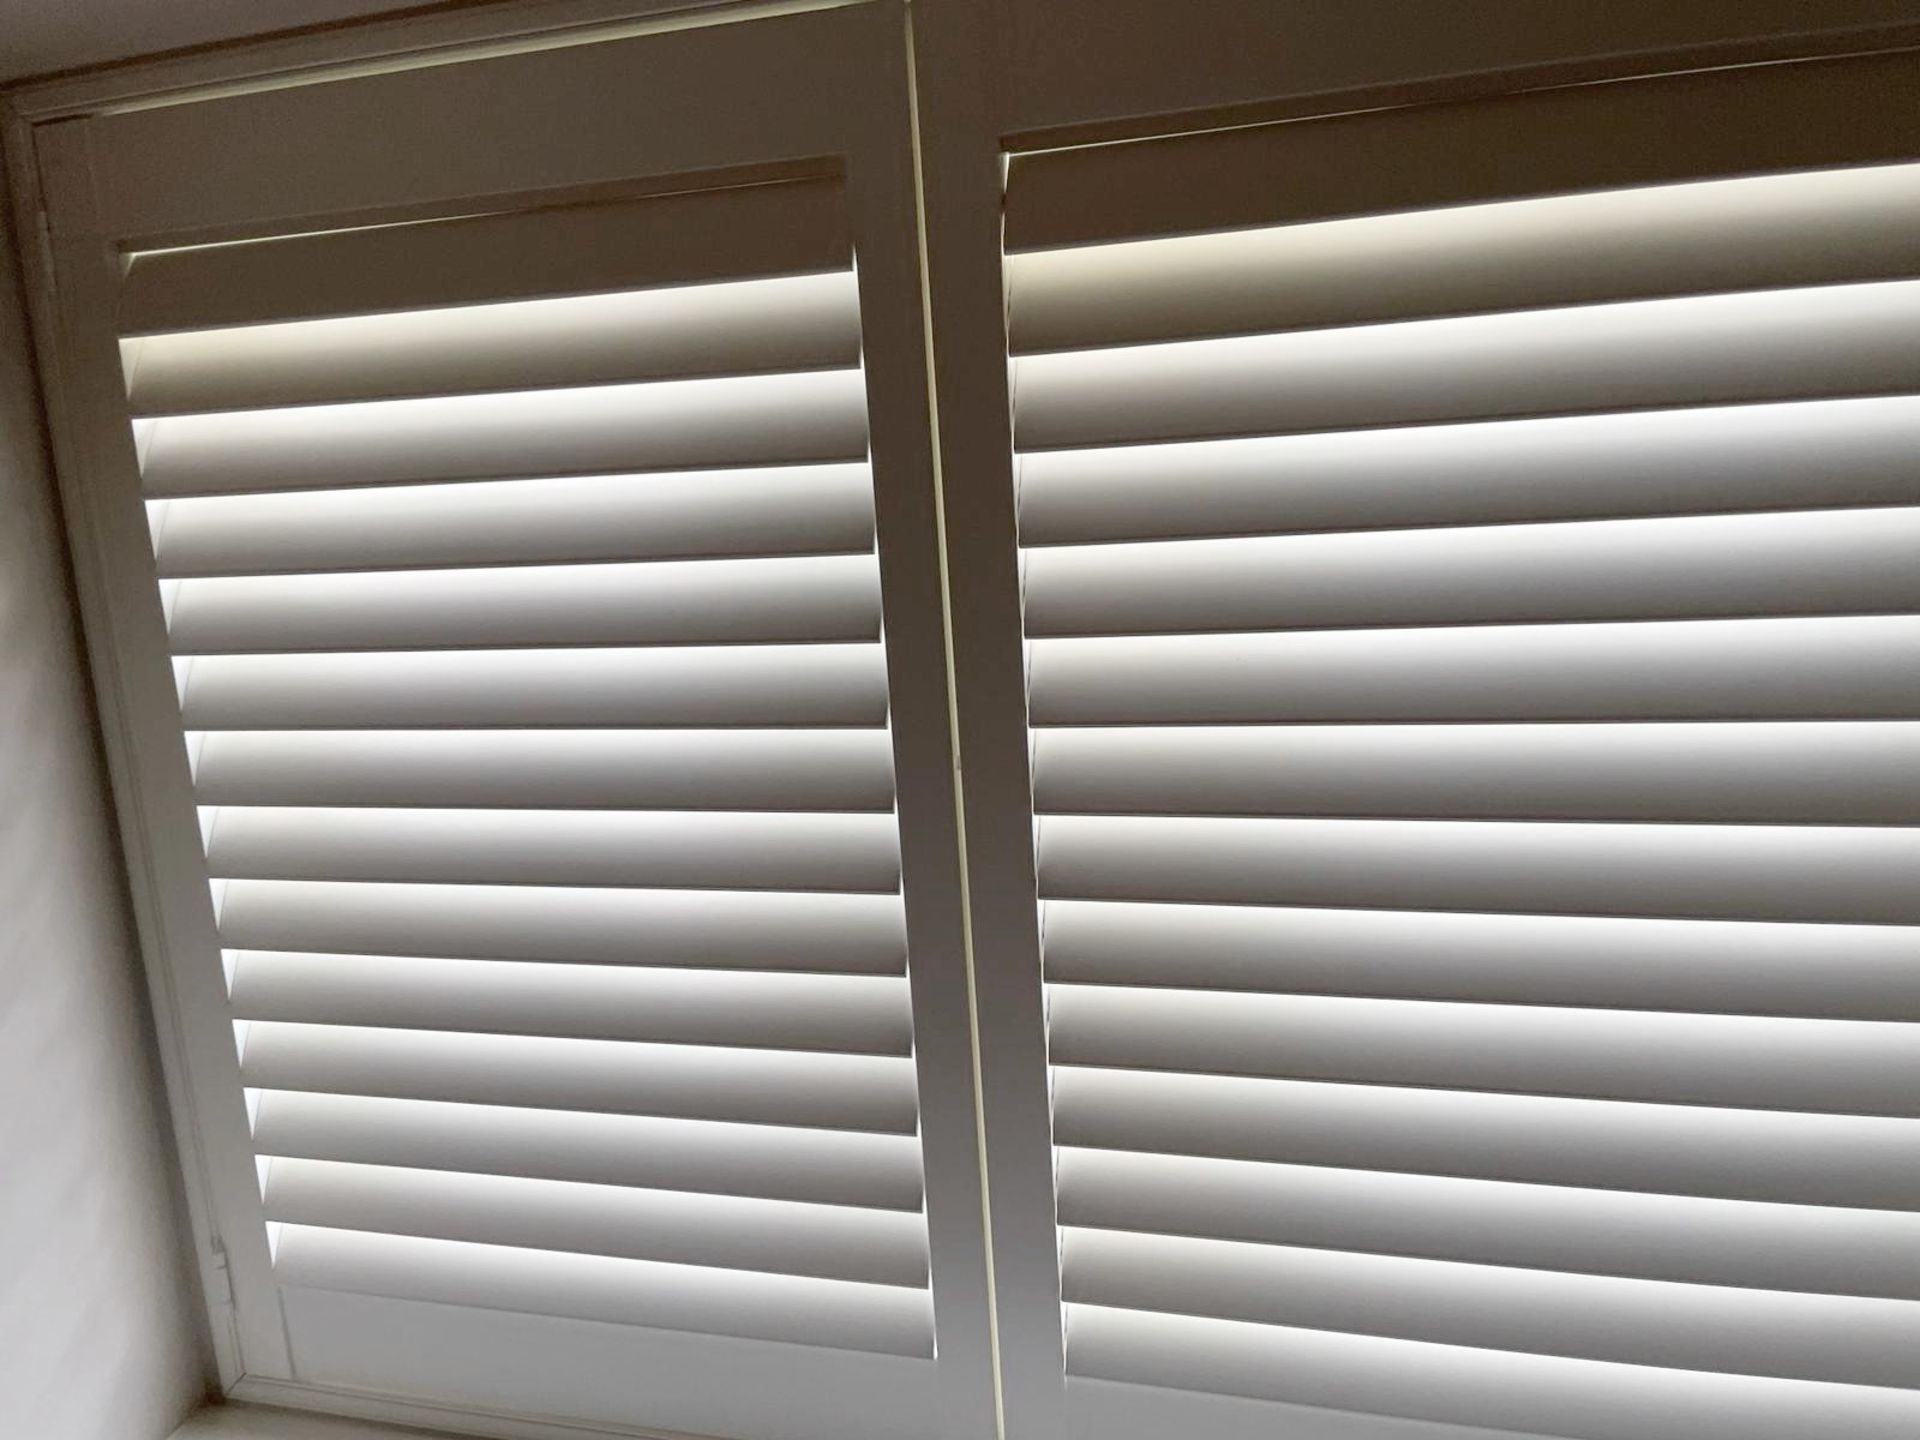 1 x Hardwood Timber Double Glazed Leaded 2-Pane Window Frame fitted with Shutter Blinds - Image 8 of 12